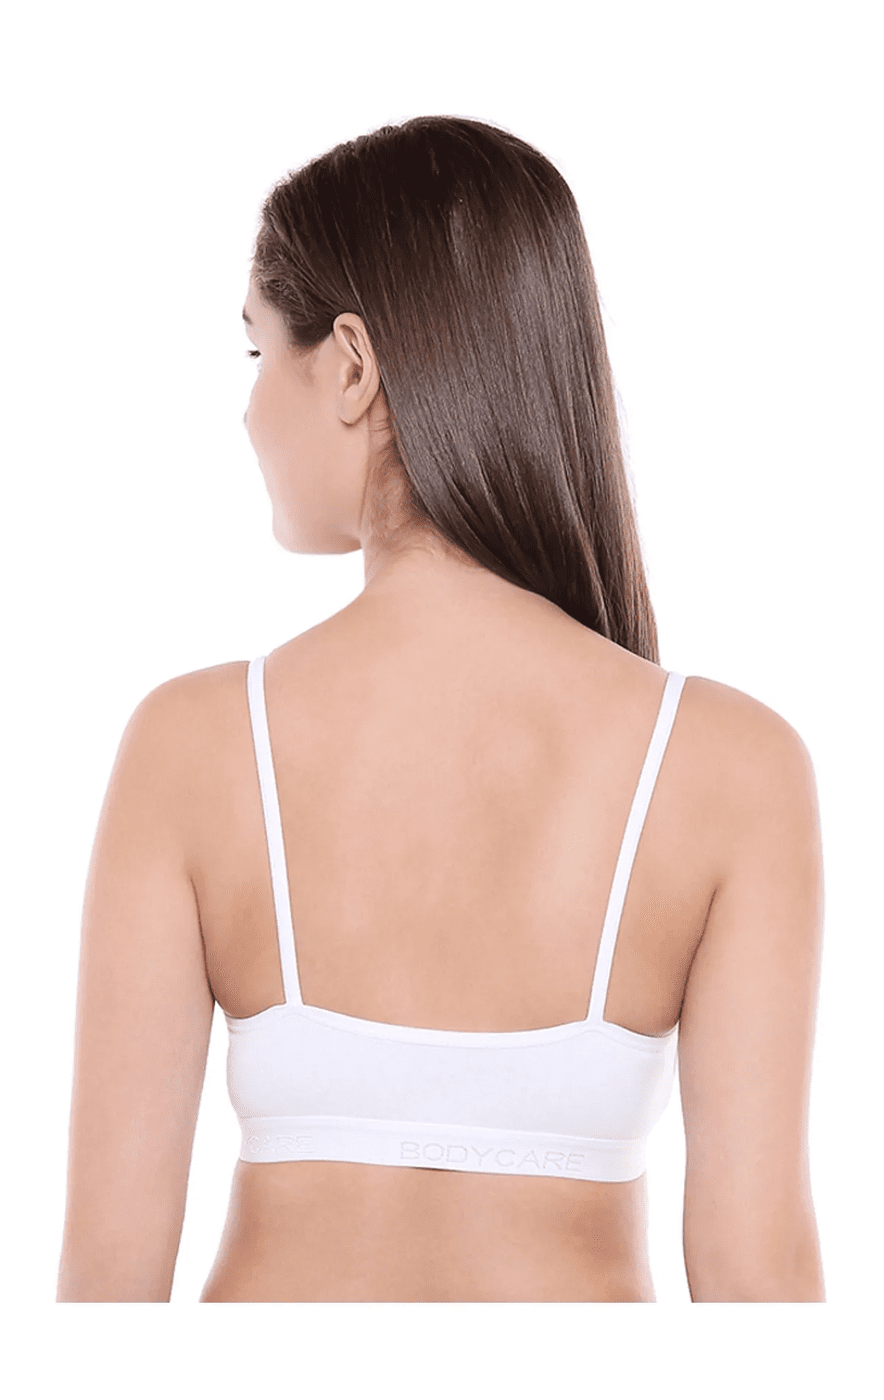 SONA by MOVING Moving Cotton Strap White Full Cup Plus Size Cotton Bra Pack  of 2 Women Training/Beginners Non Padded Bra - Buy SONA by MOVING Moving  Cotton Strap White Full Cup